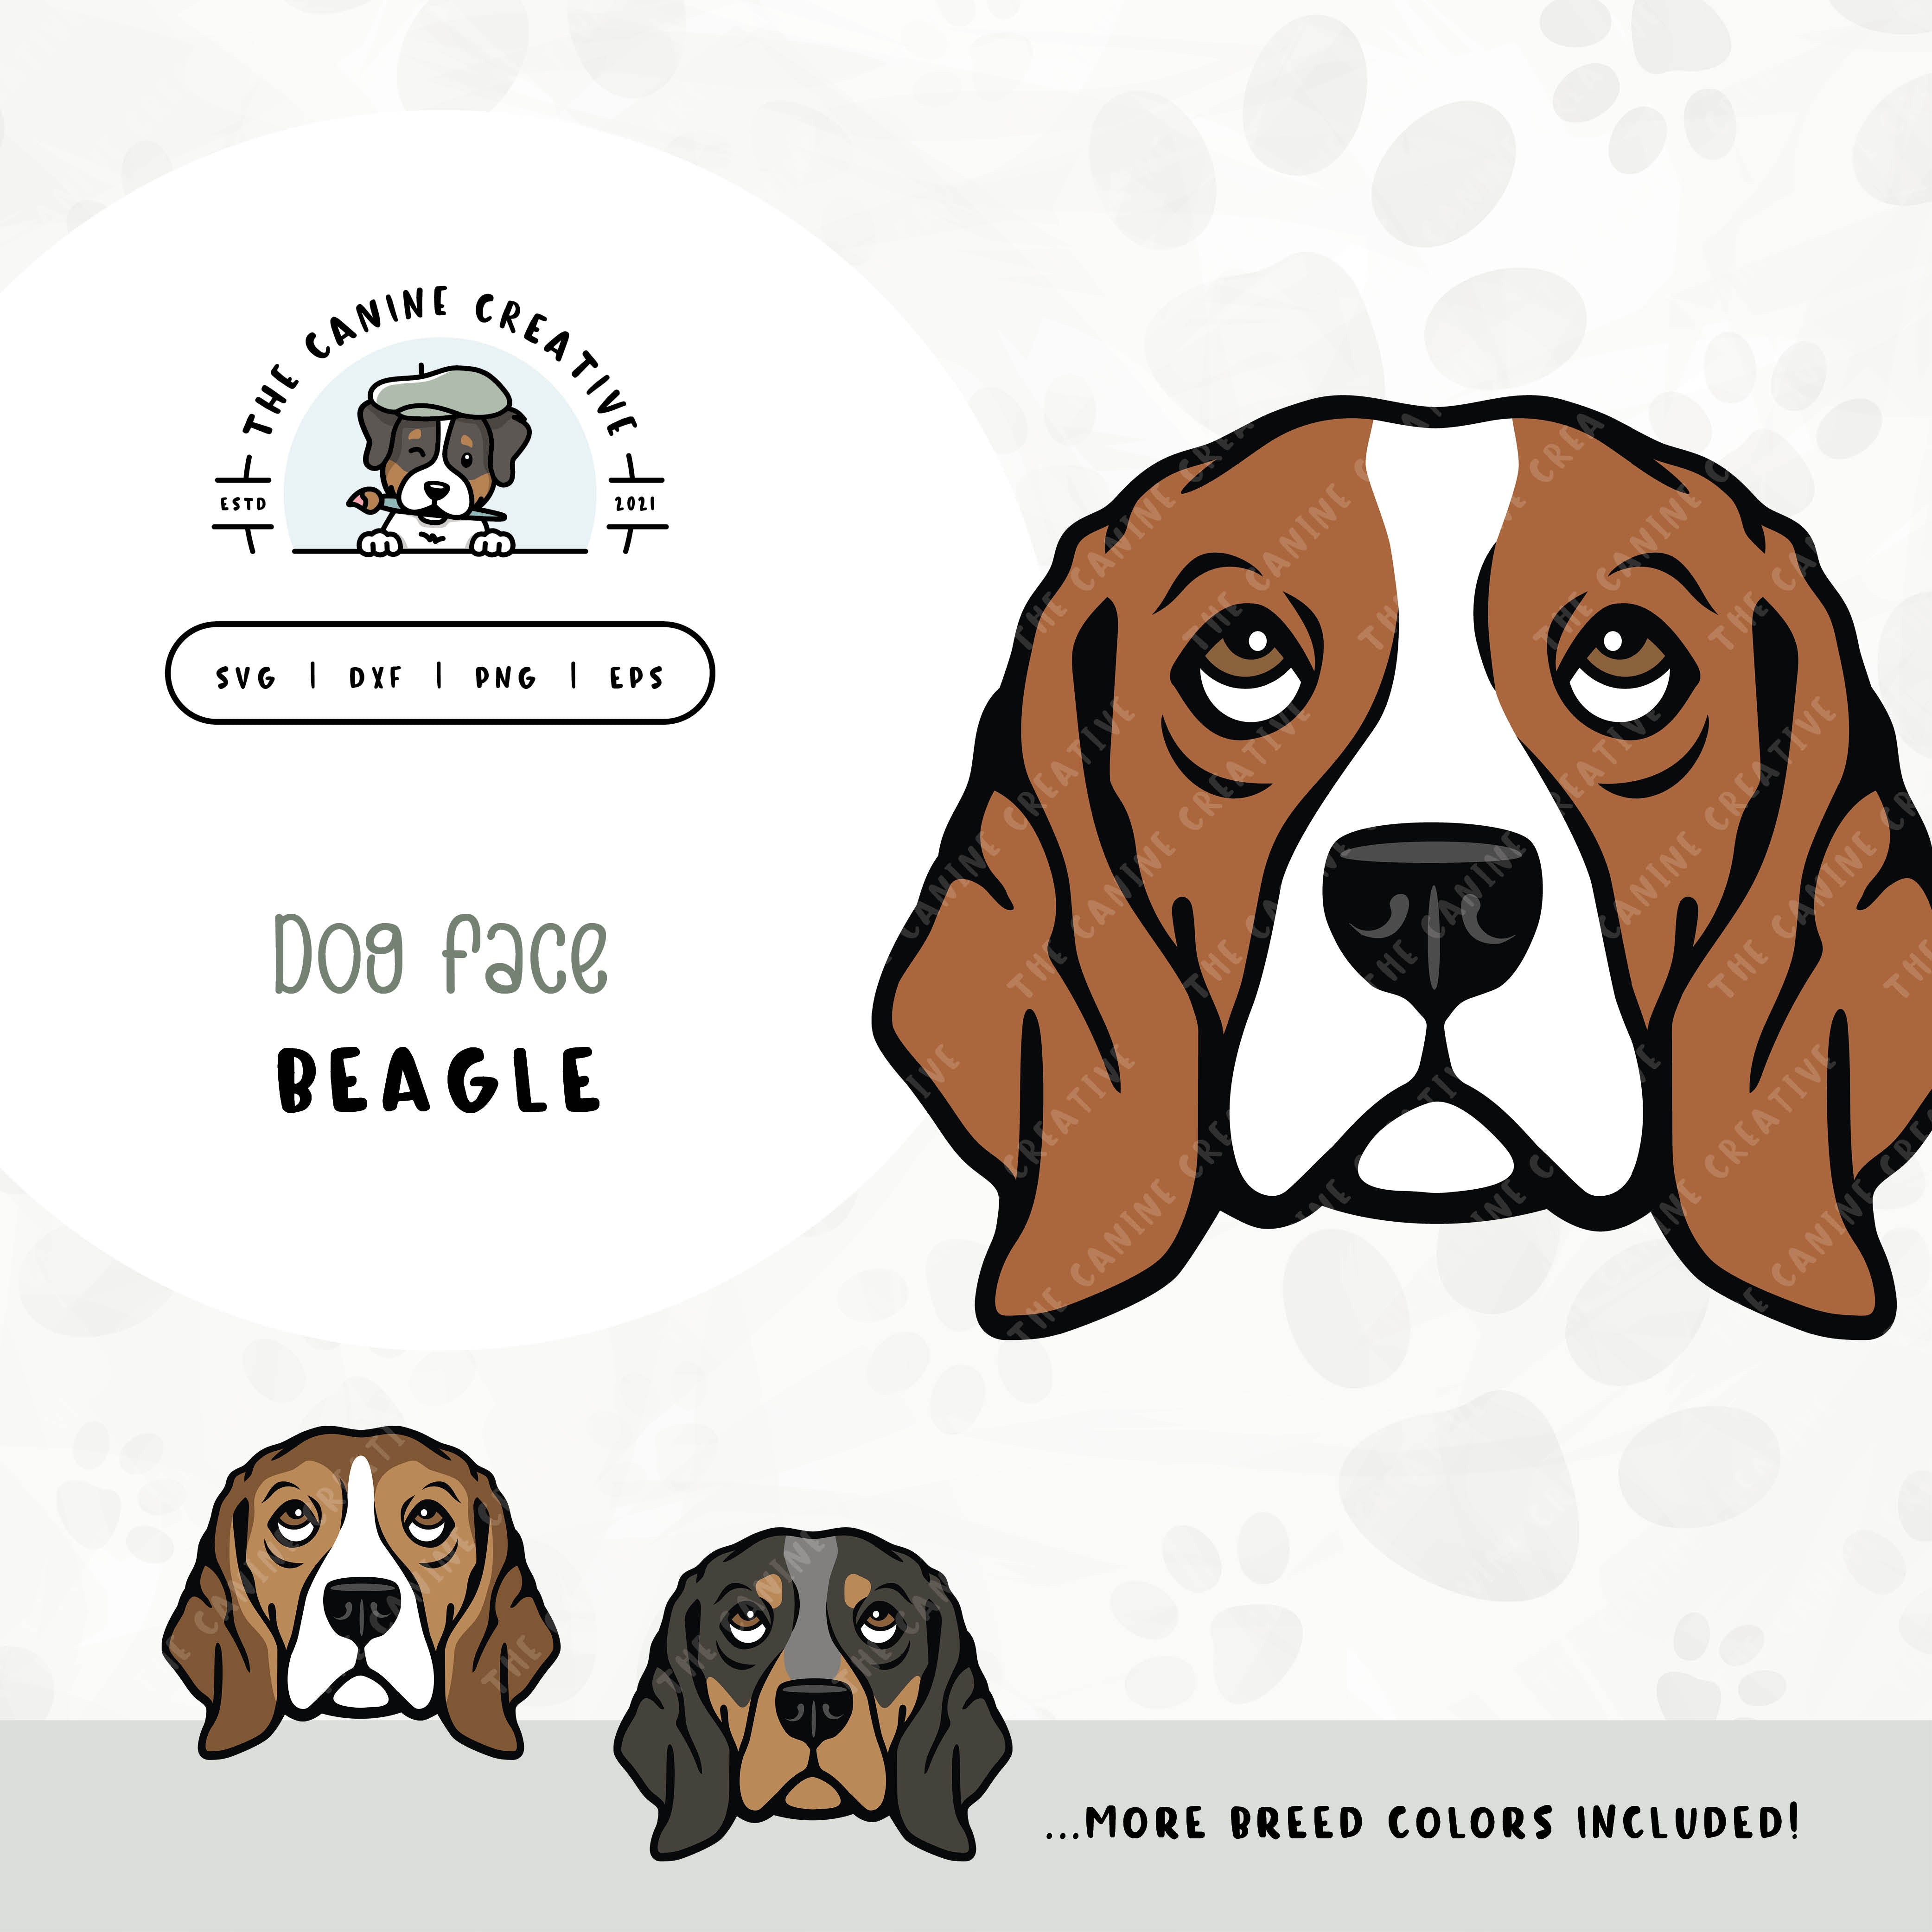 This illustrated design features a Beagle dog face. File formats include: SVG, DXF, PNG, and EPS.